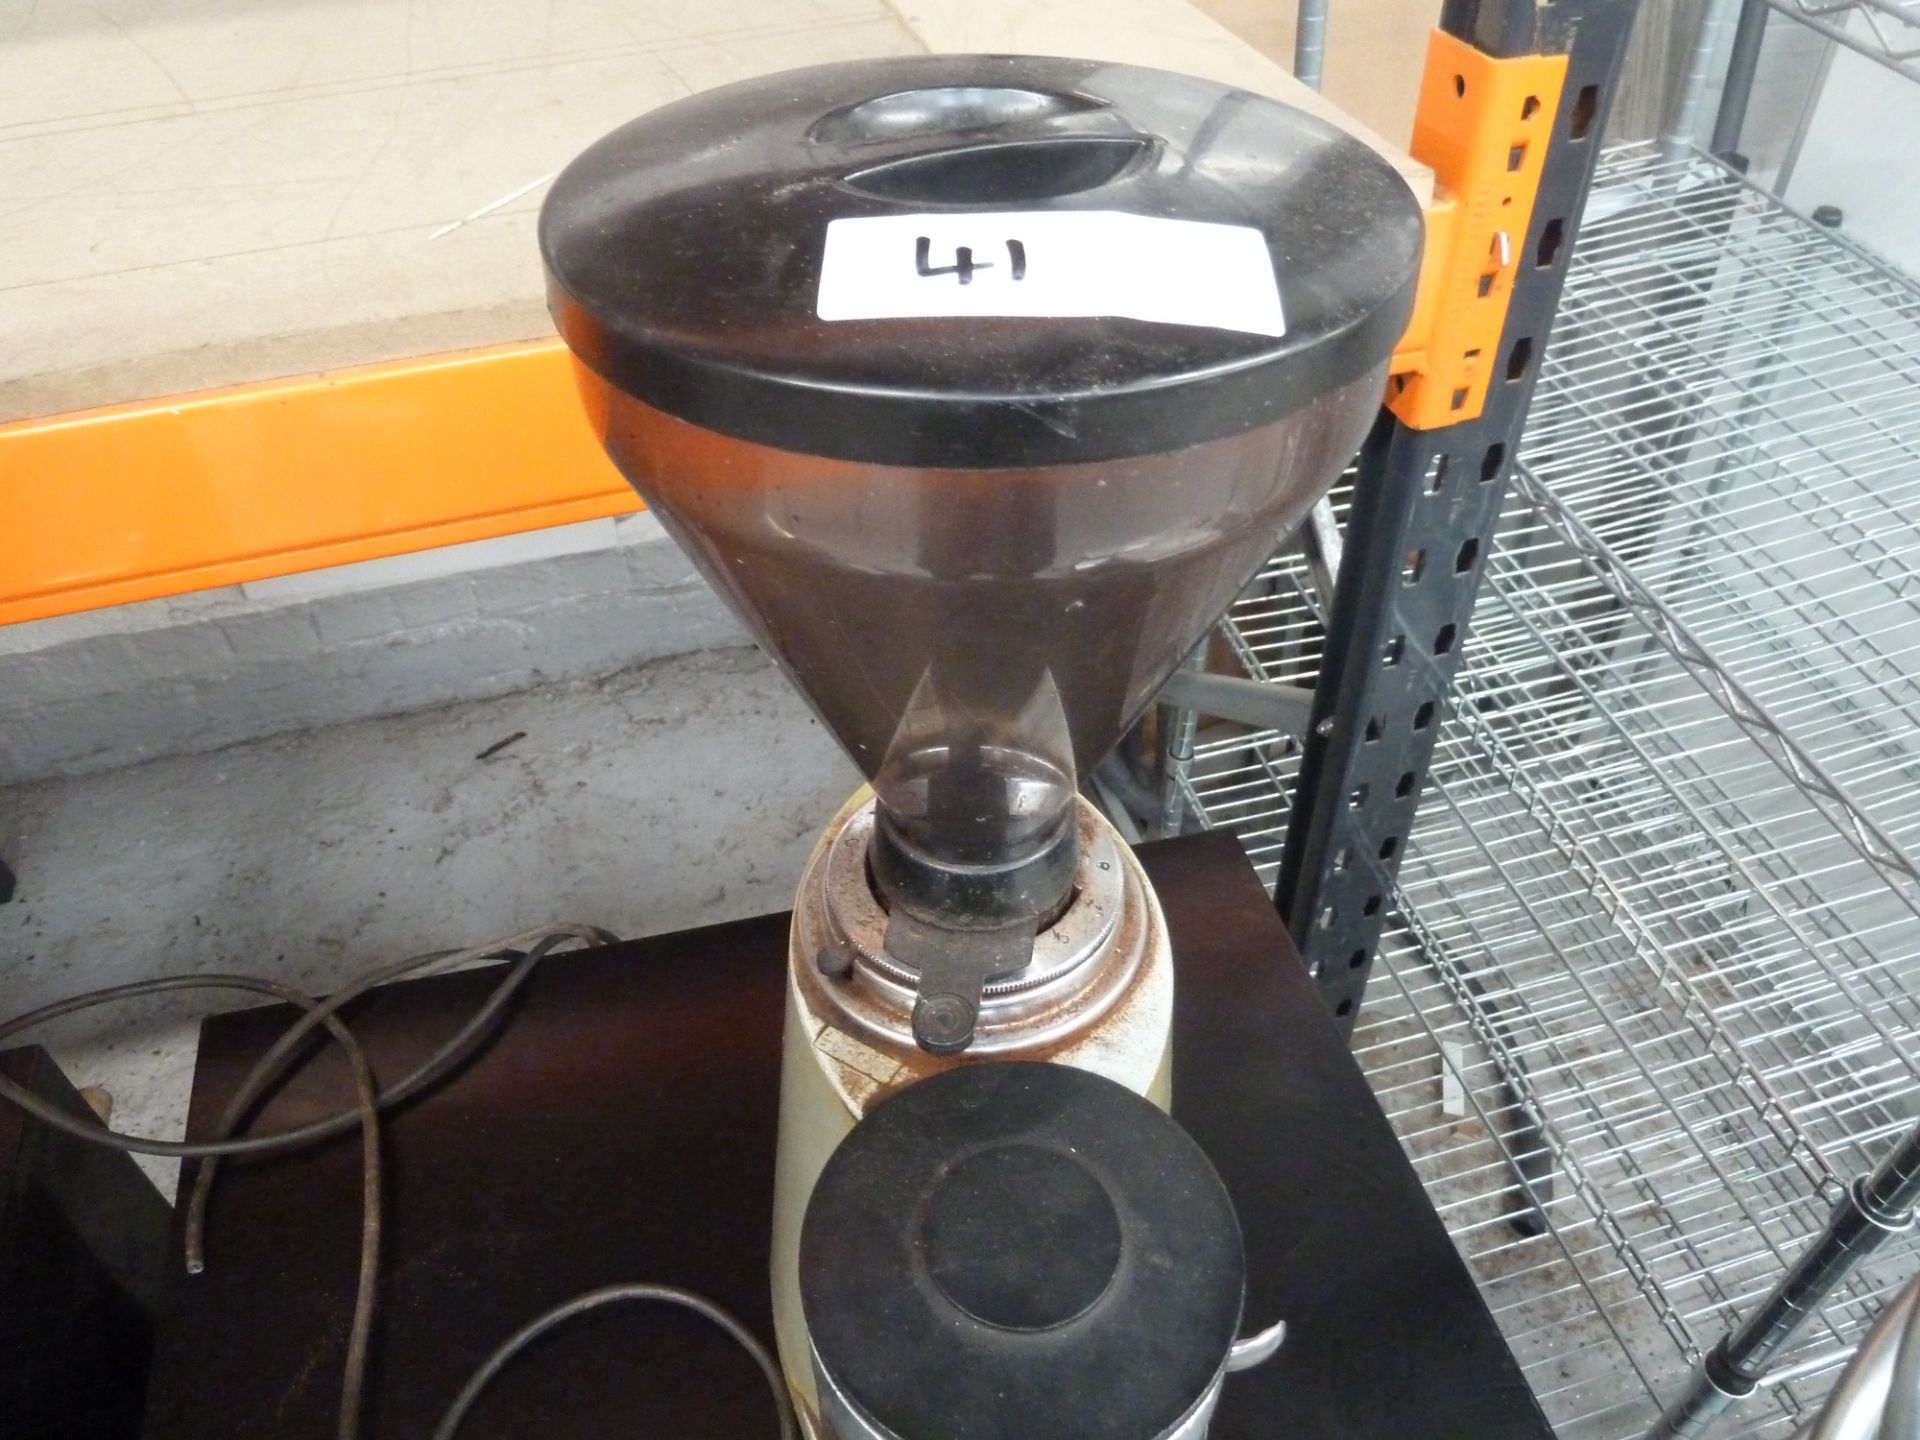 * coffee grinder, clean condition, sold as seen.